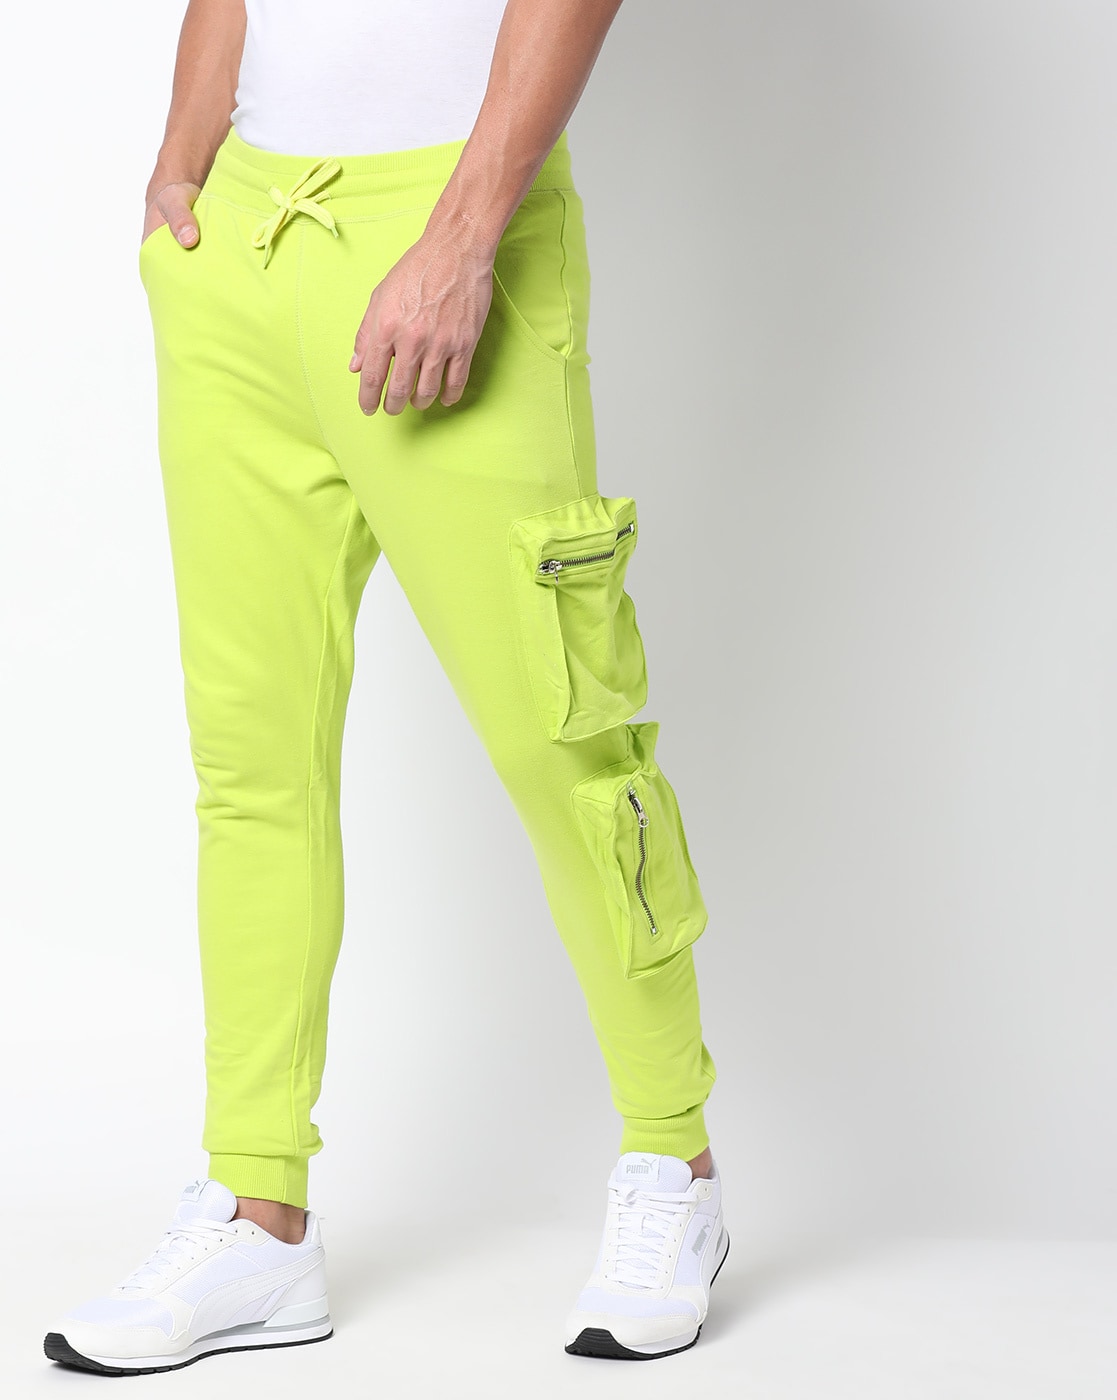 BESIVA Mens Colour Block Black and Neon Green Regular Fit Track Pants   Amazonin Clothing  Accessories